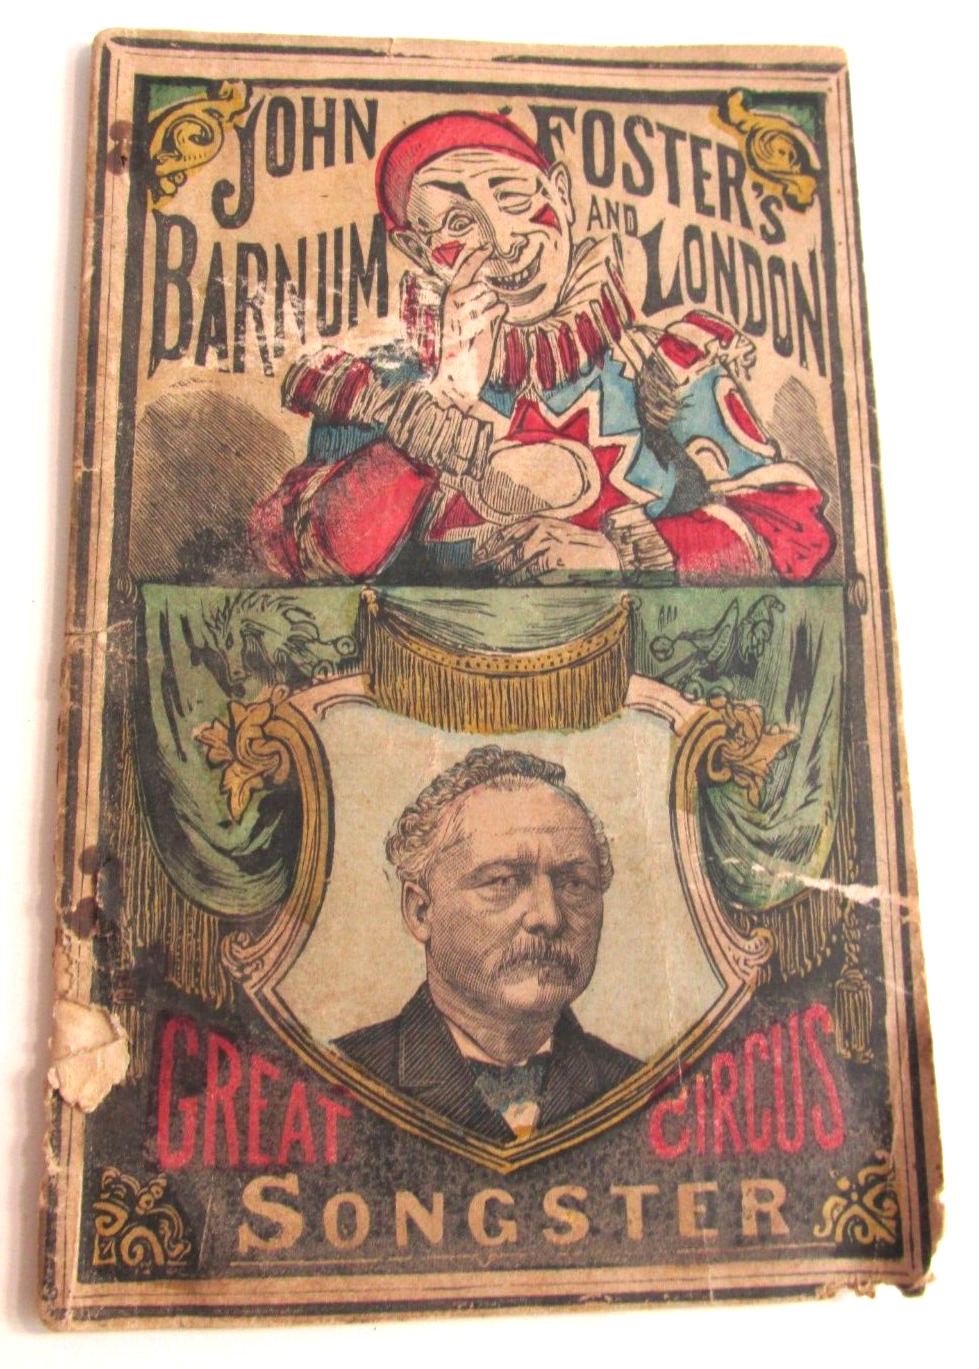 John Foster's Great Barnum & London Circus Clown Songster Booklet 1880s Song Bk